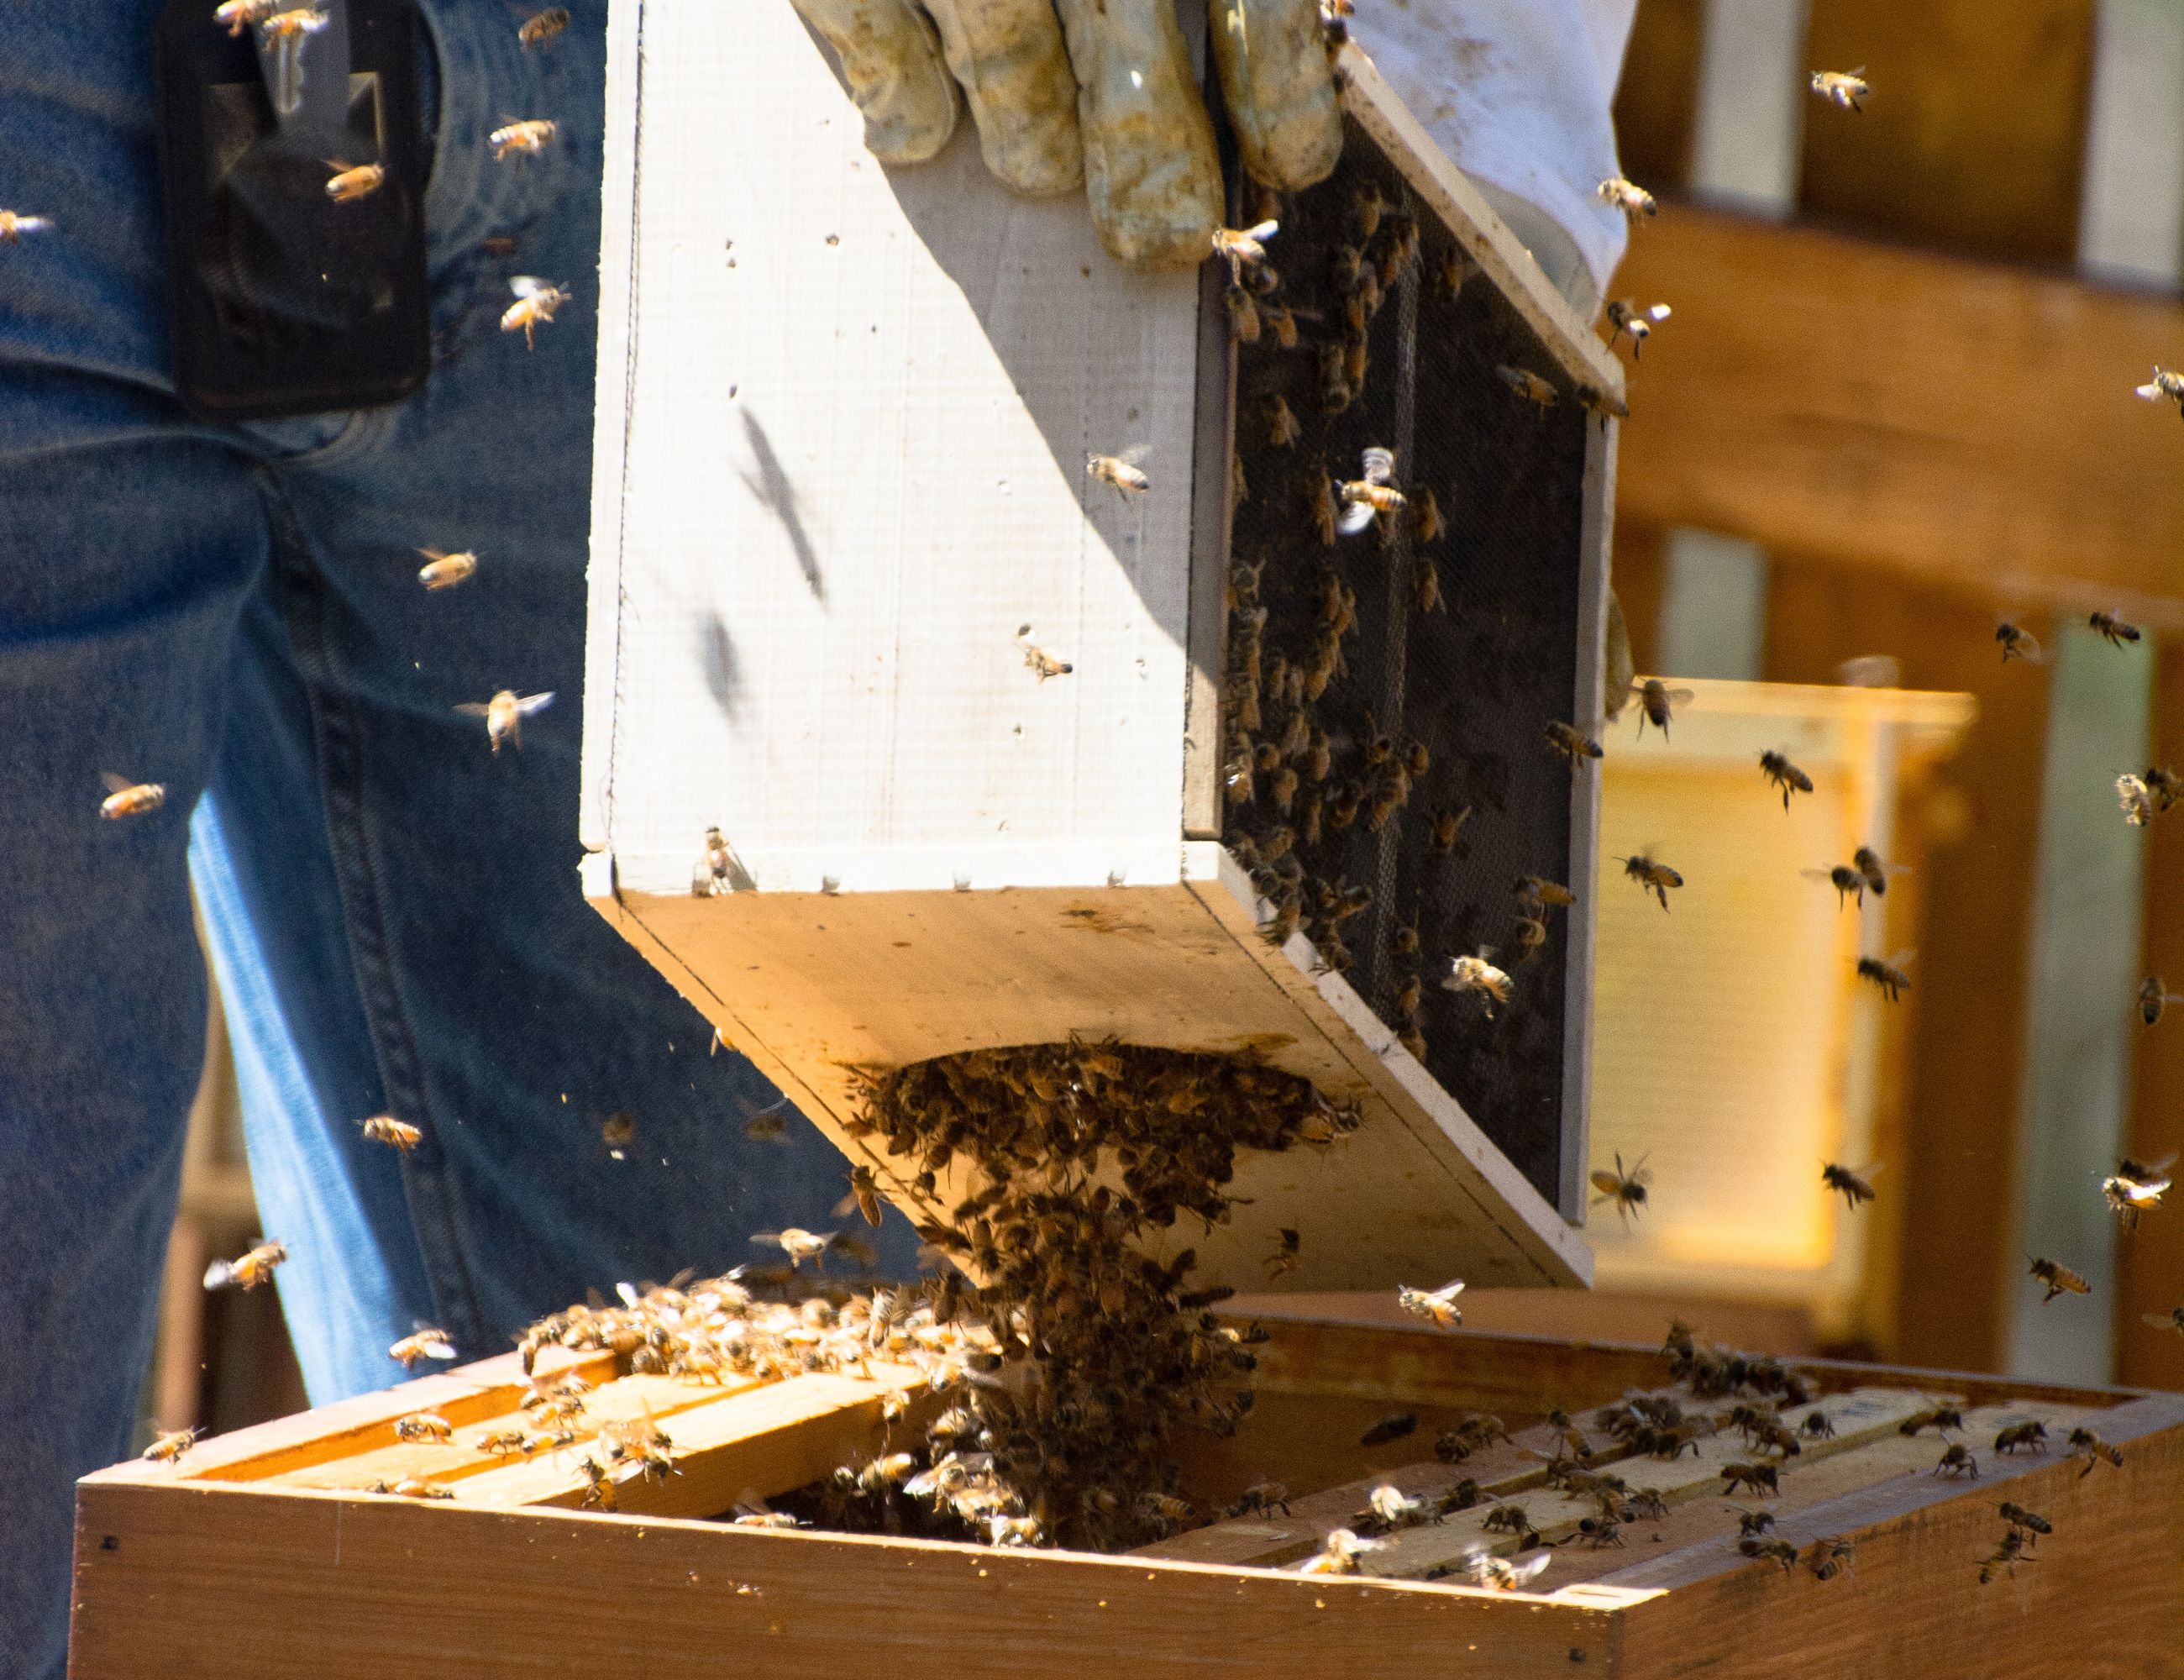 installing honeybees into a hive box